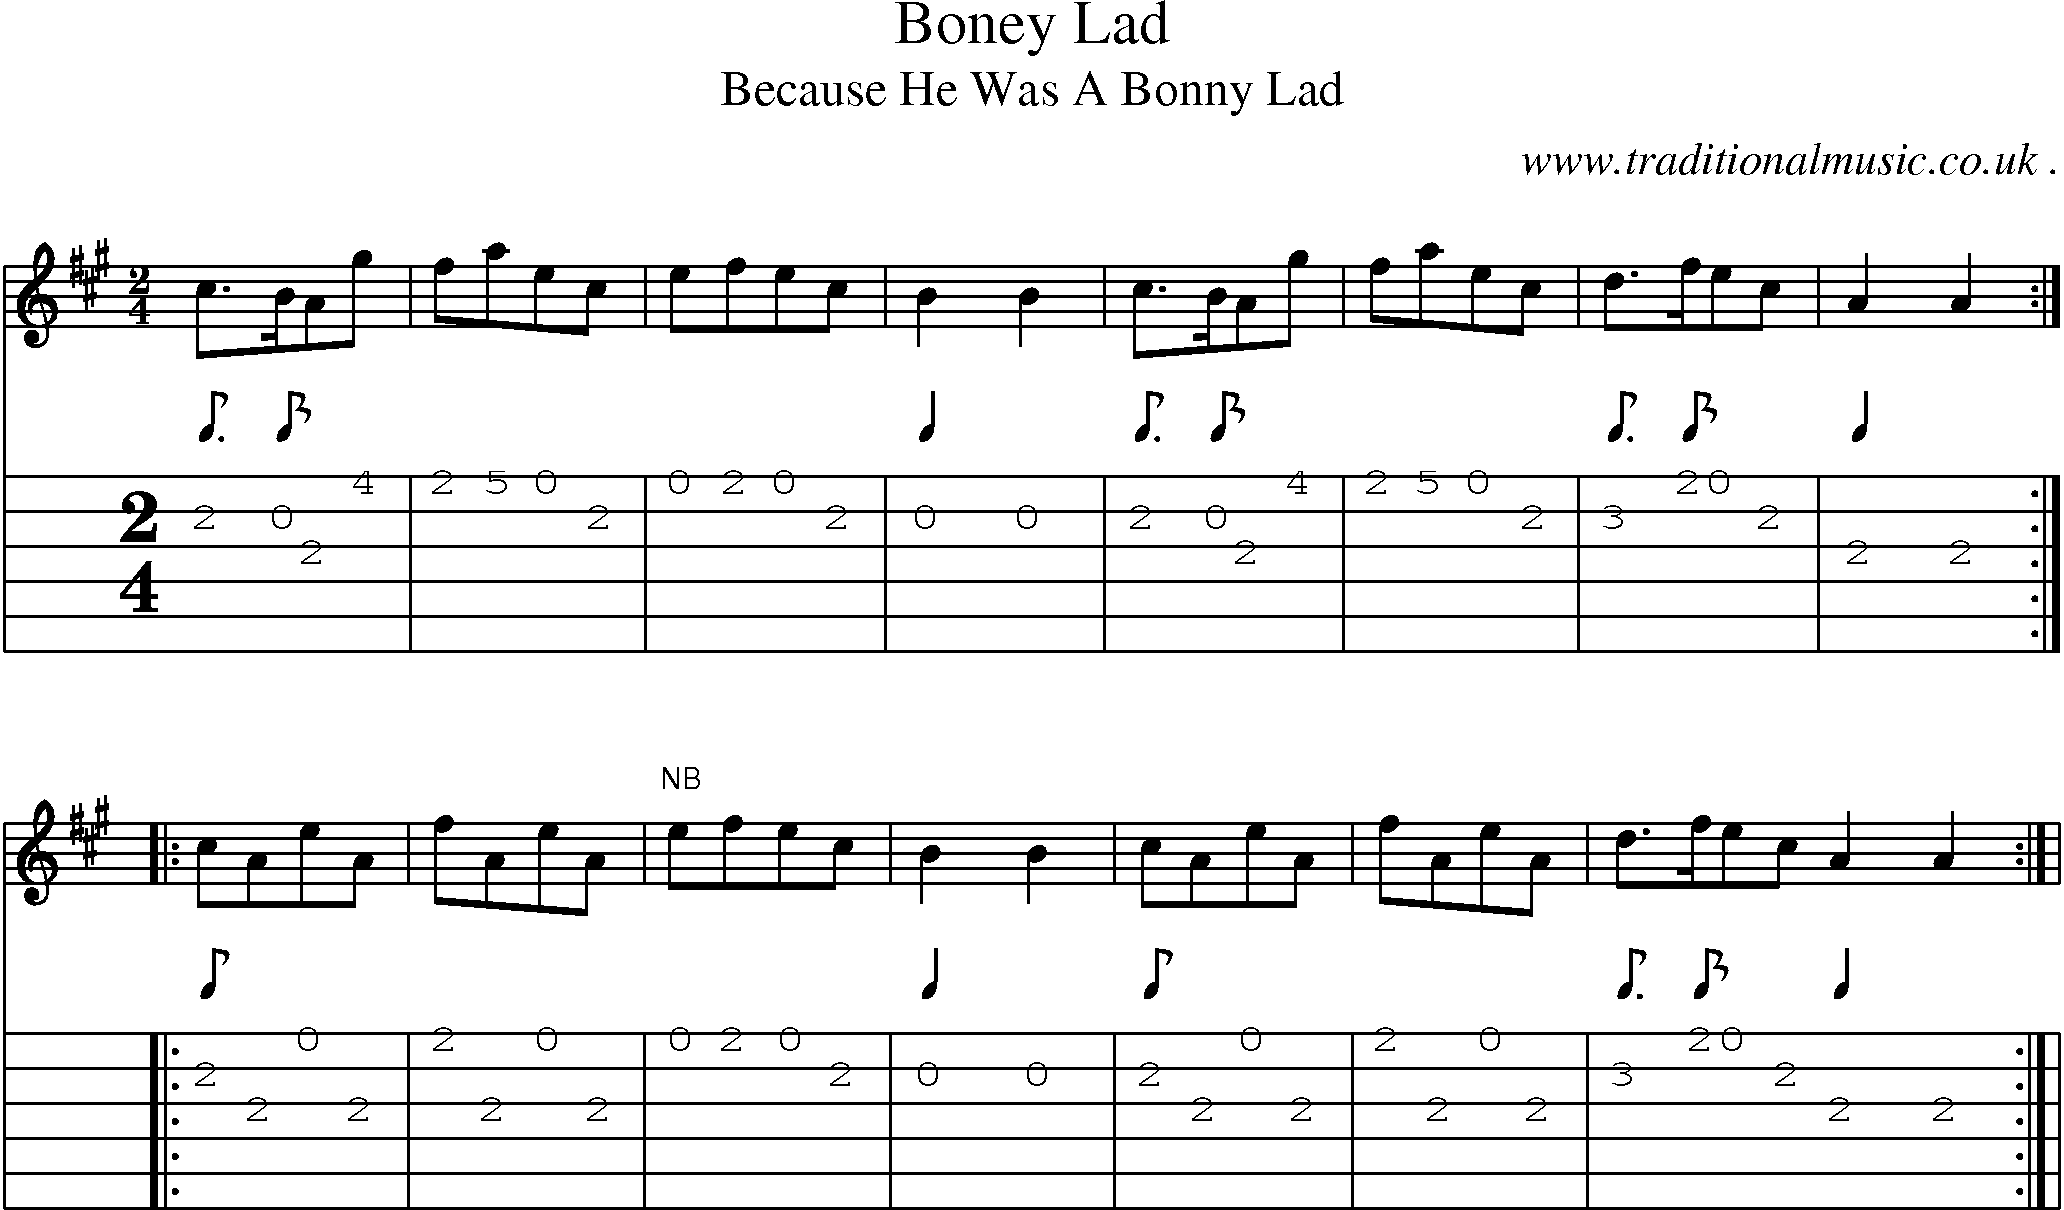 Sheet-Music and Guitar Tabs for Boney Lad